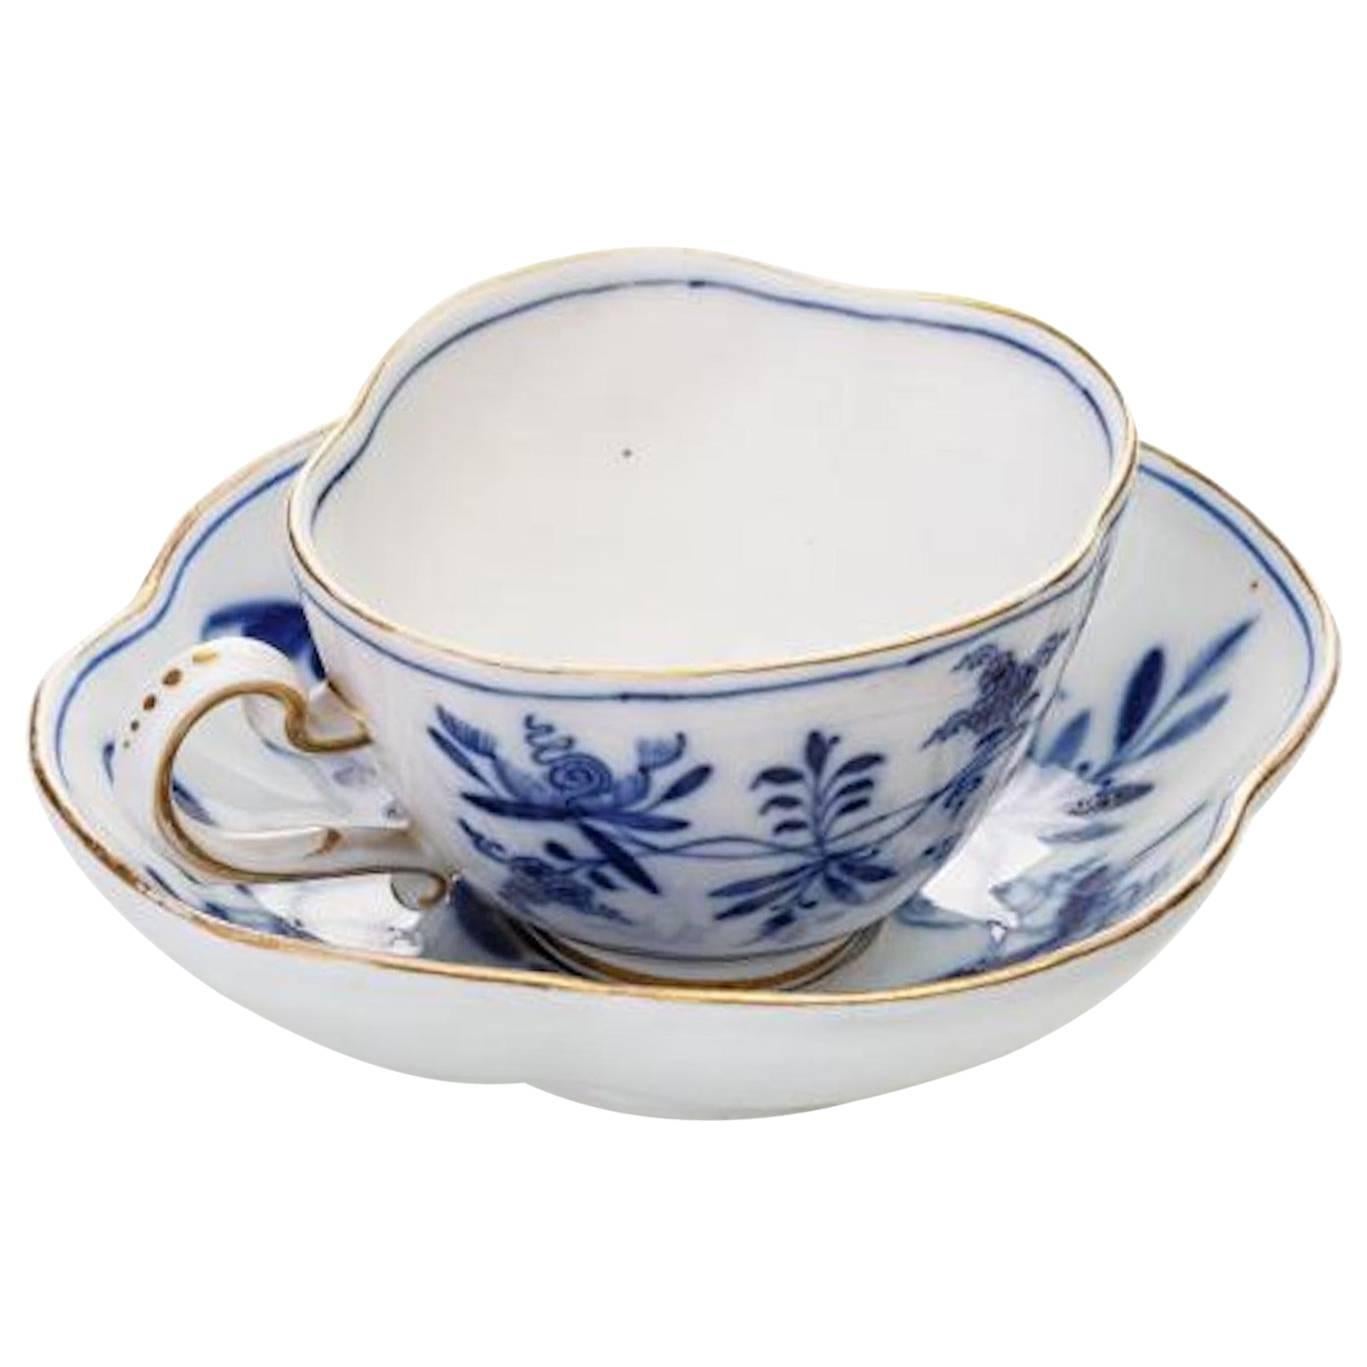 19th Century German Meissen Porcelain Cup and Saucer For Sale